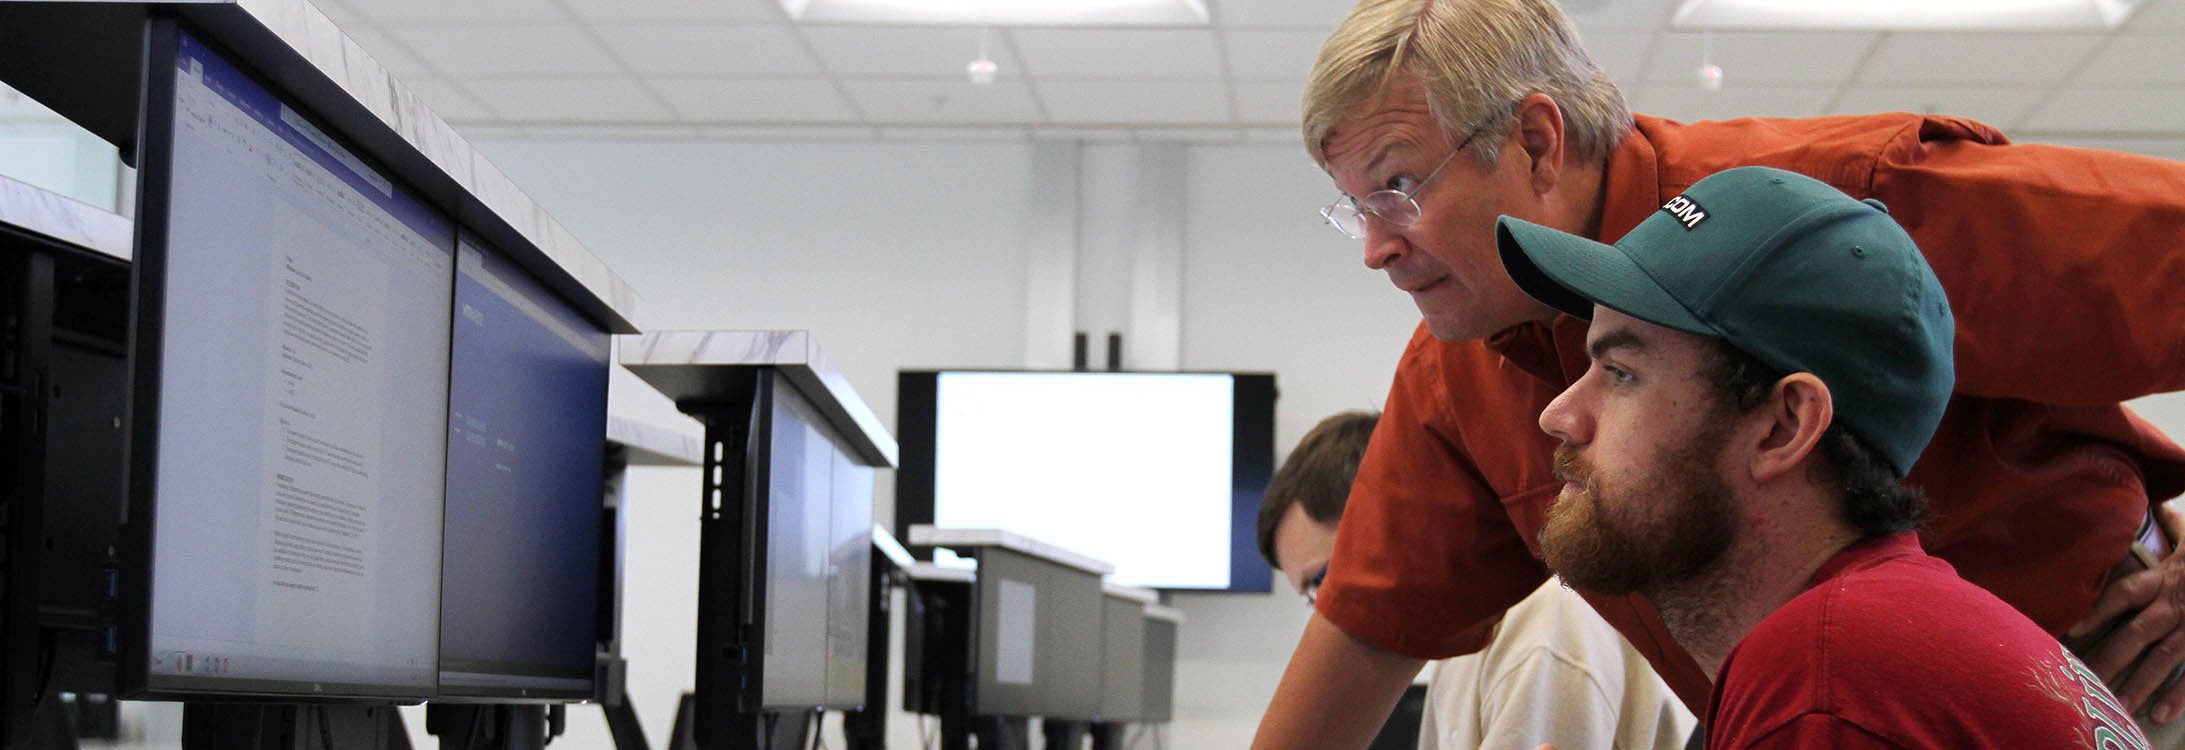 Dr. Charles Lesko instructs Nicholas Hempenius, a second-year graduate student from Jacksonville, in the new cybersecurity lab in the Science and Technology Building. The lab supports about 150 students with concentrations in cybersecurity. (Photos by Ken Buday)